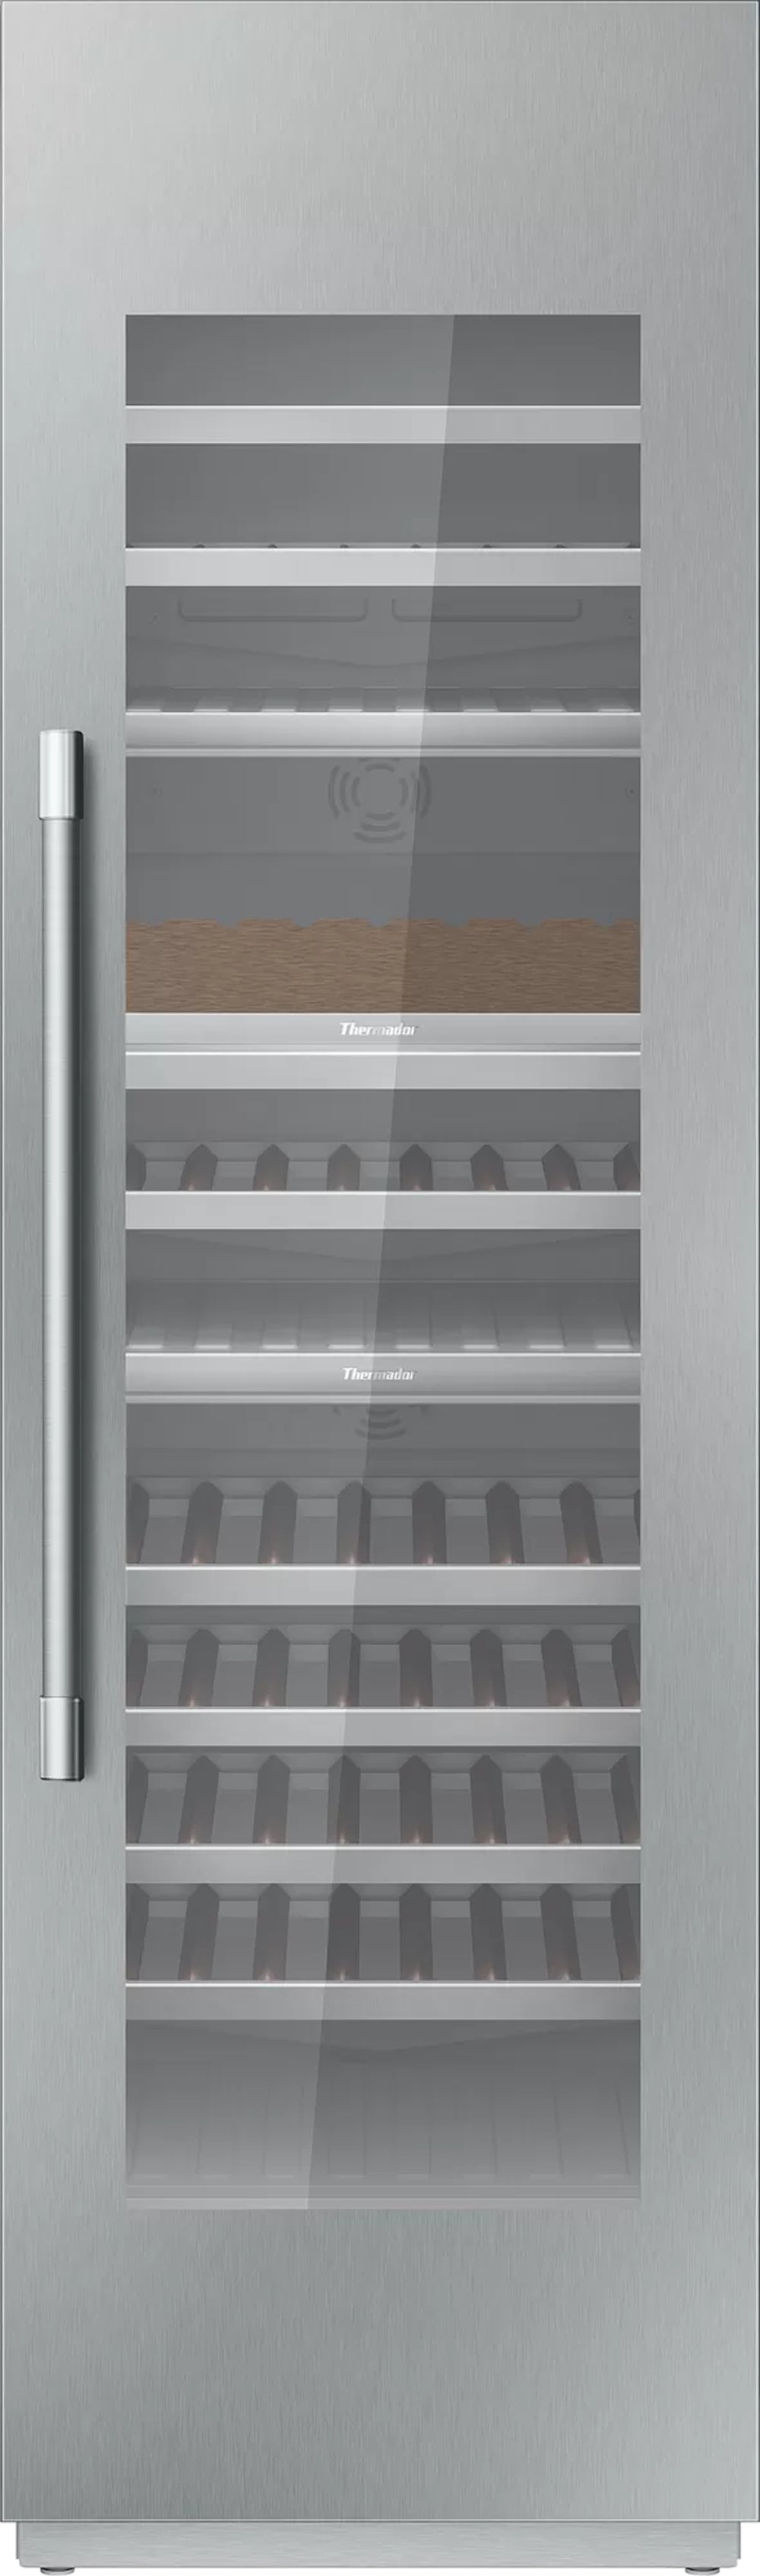 Thermador - 23.75 Inch  cu. ft Wine Fridge Refrigerator in Panel Ready - T24IW901SP